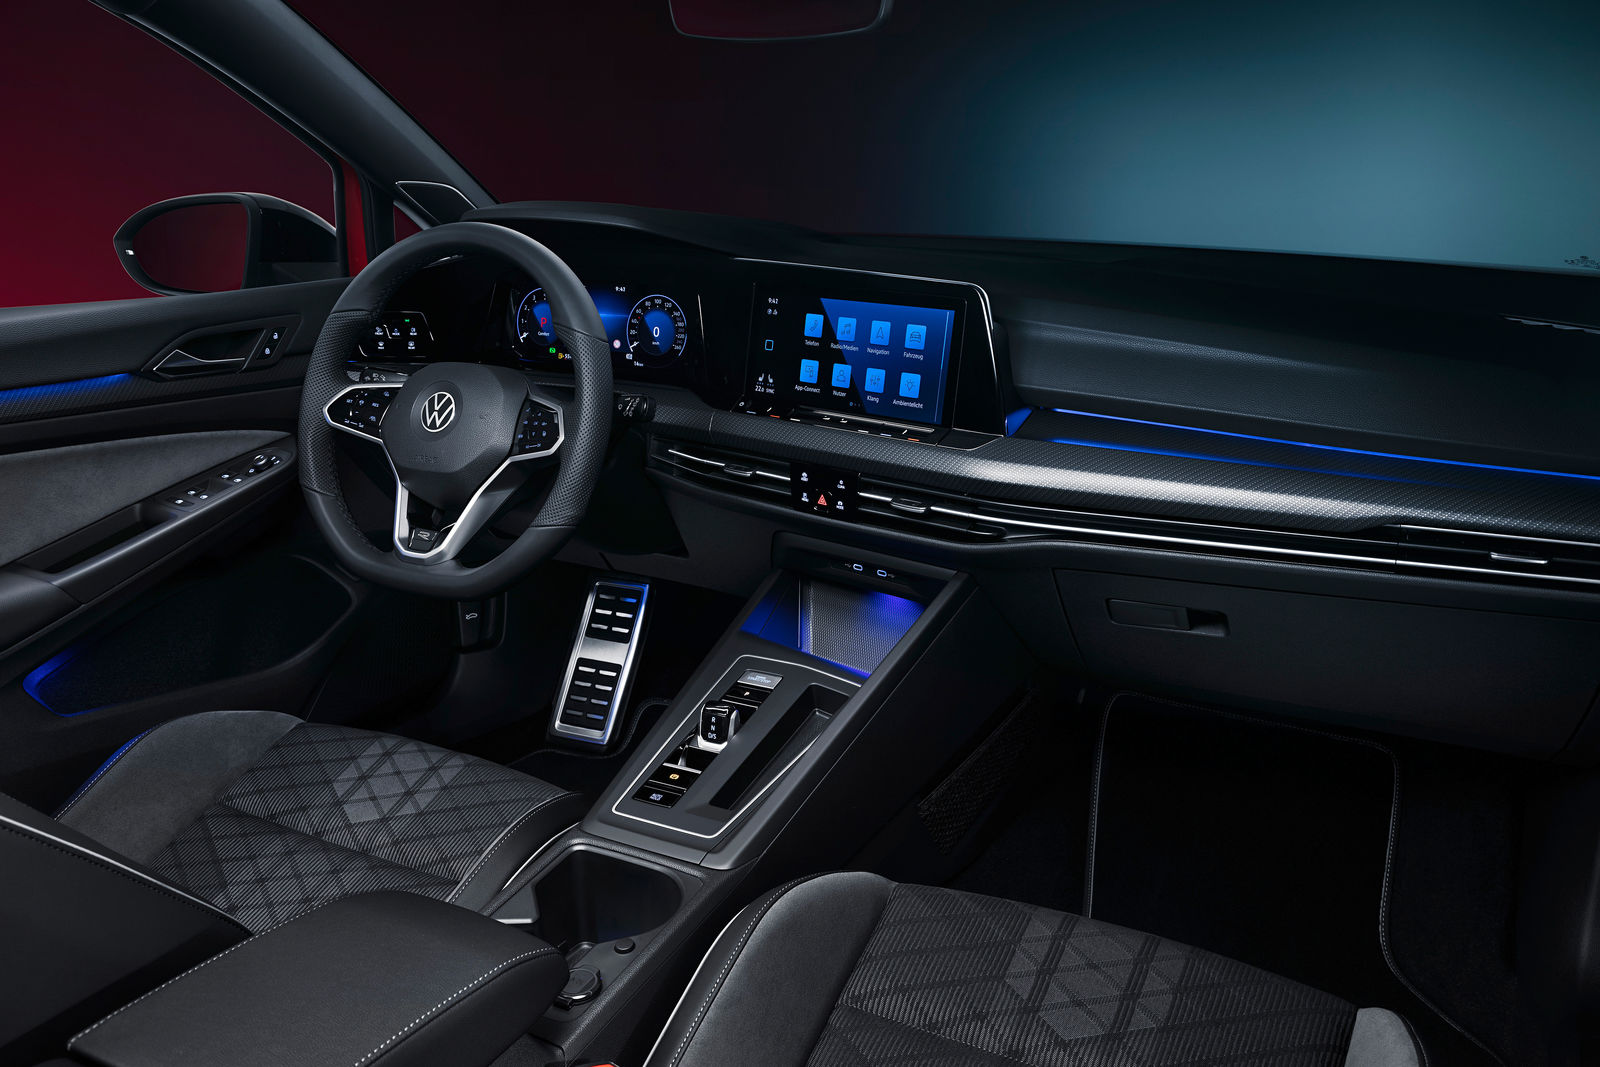 More space, more Golf: world premiere of the new Golf Variant and